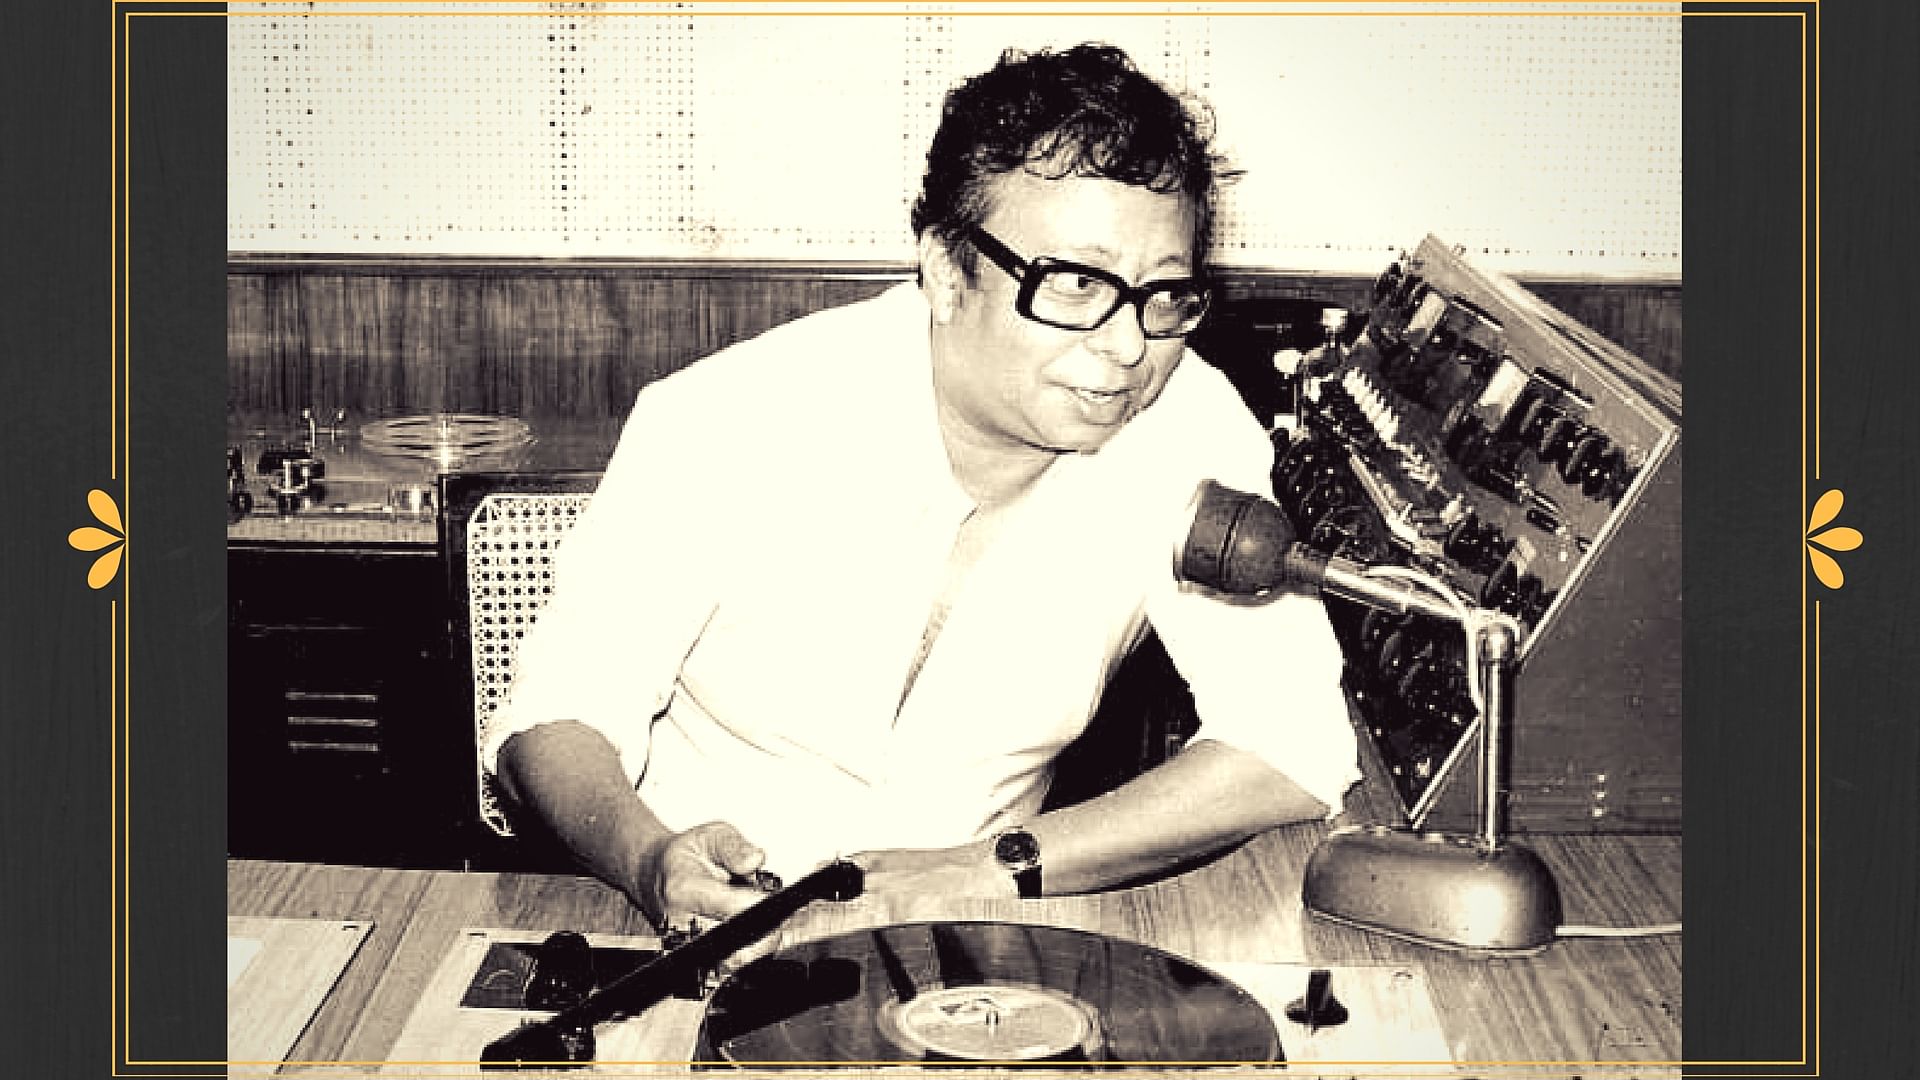 RD Burman aka Pancham and why’ll always be the BOSS of Bollywood music (Photo courtesy: <a href="https://www.youtube.com/watch?v=M4zf7JongGk&amp;feature=youtu.be">YouTube/Pavan Jha</a>)